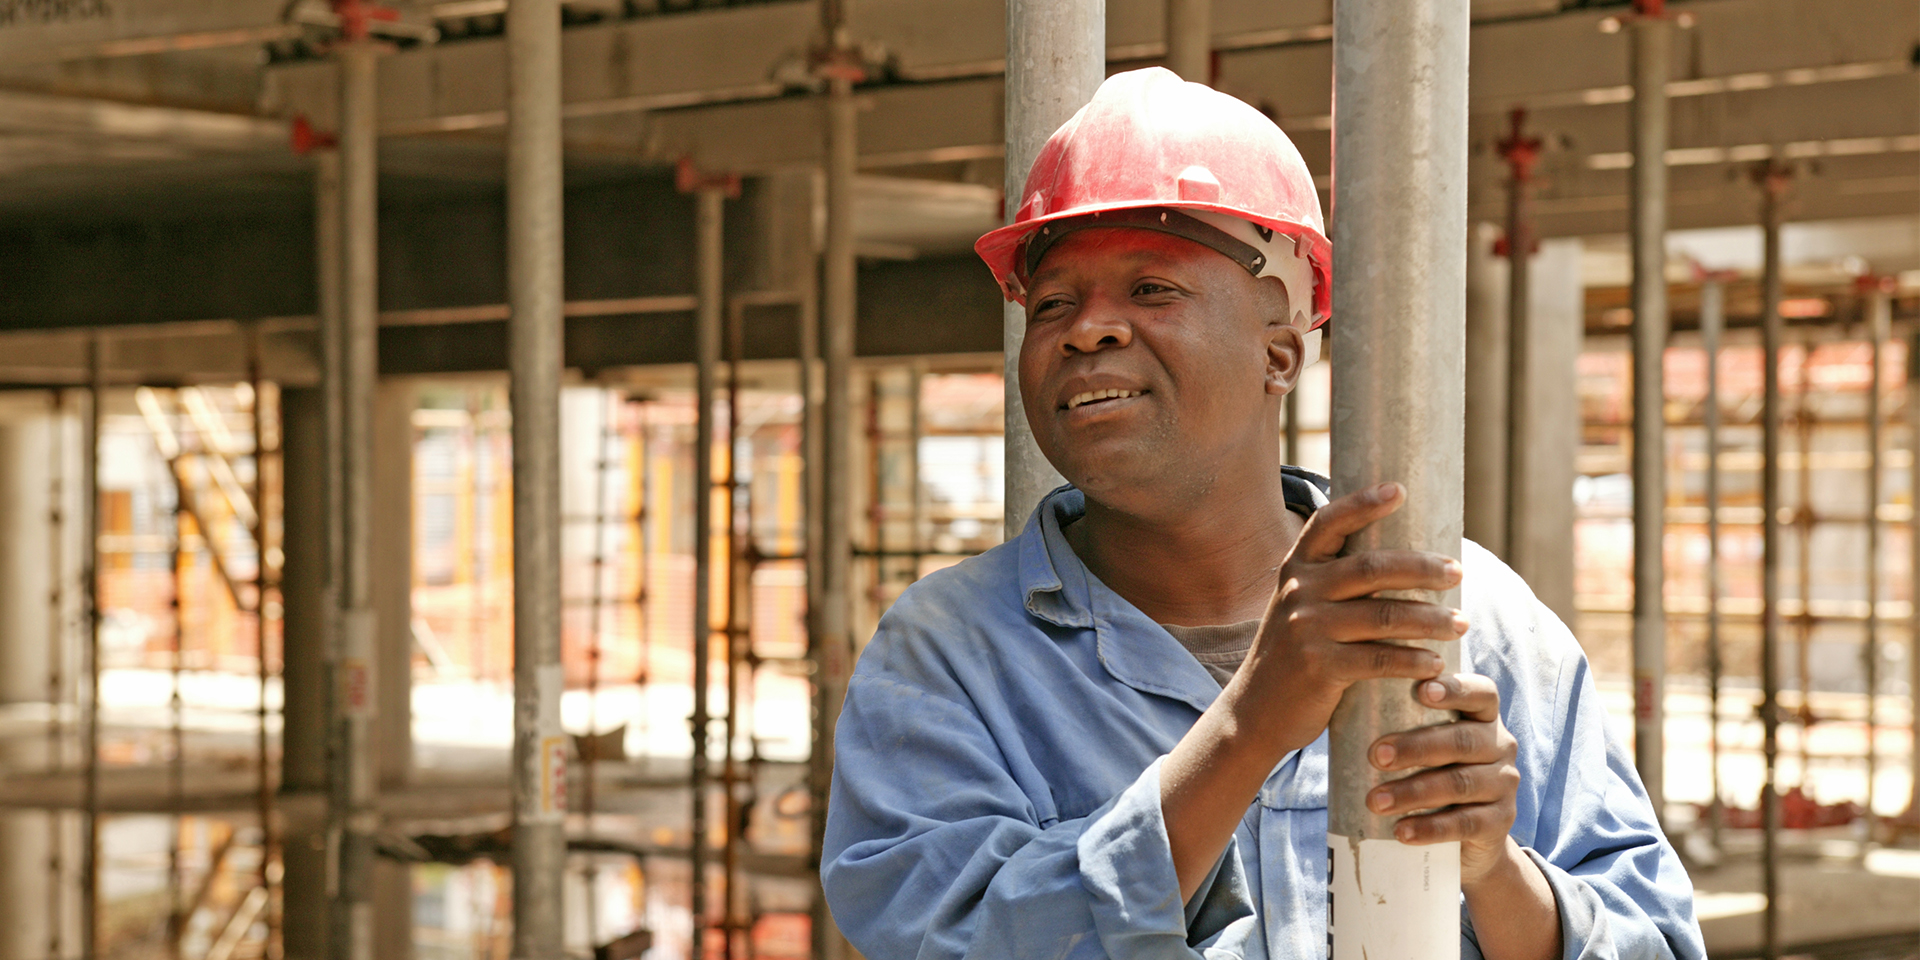 Image of a construction worker within a building under construction smiling and holding onto a steel girder.